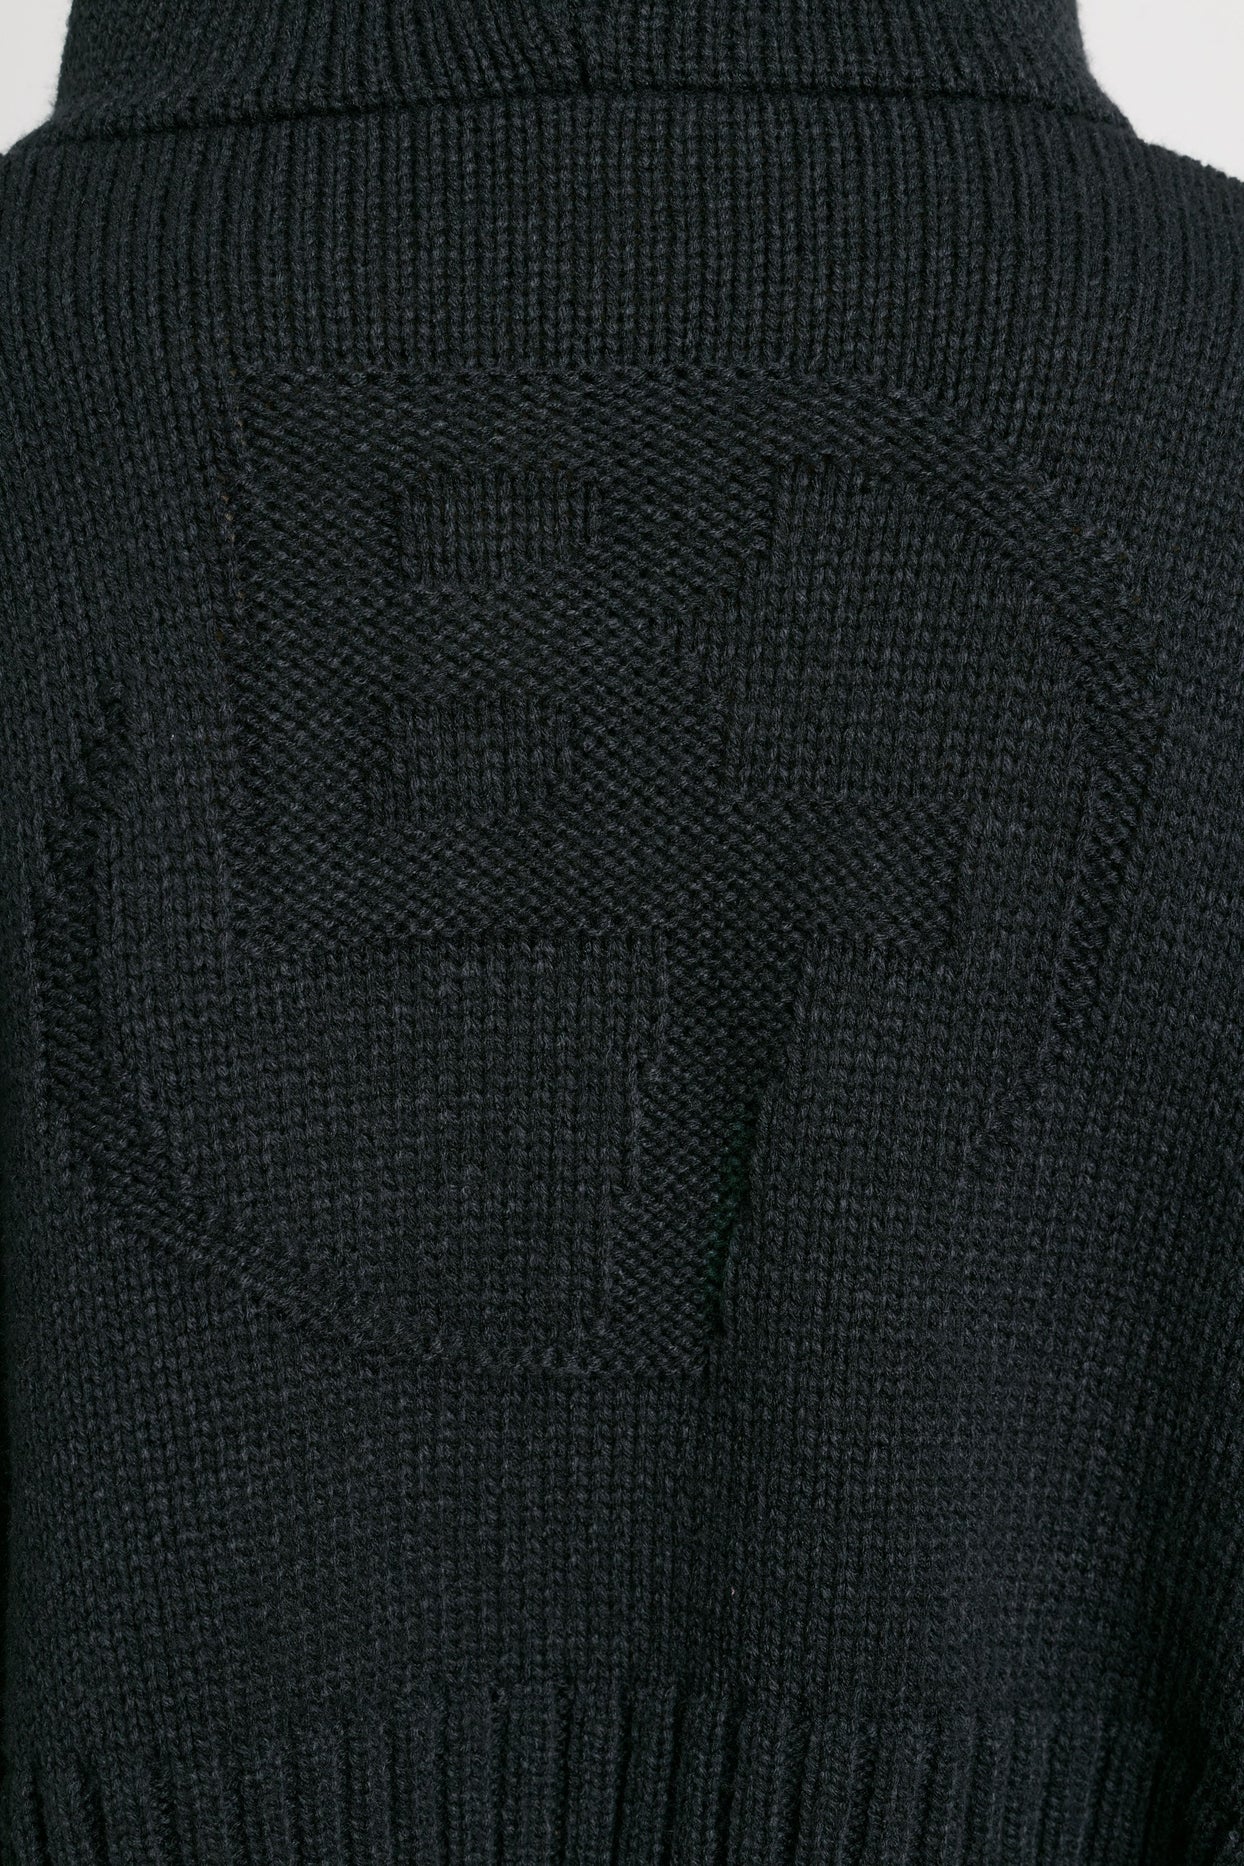 Cropped Zip Up Chunky Knit Hoodie in Black